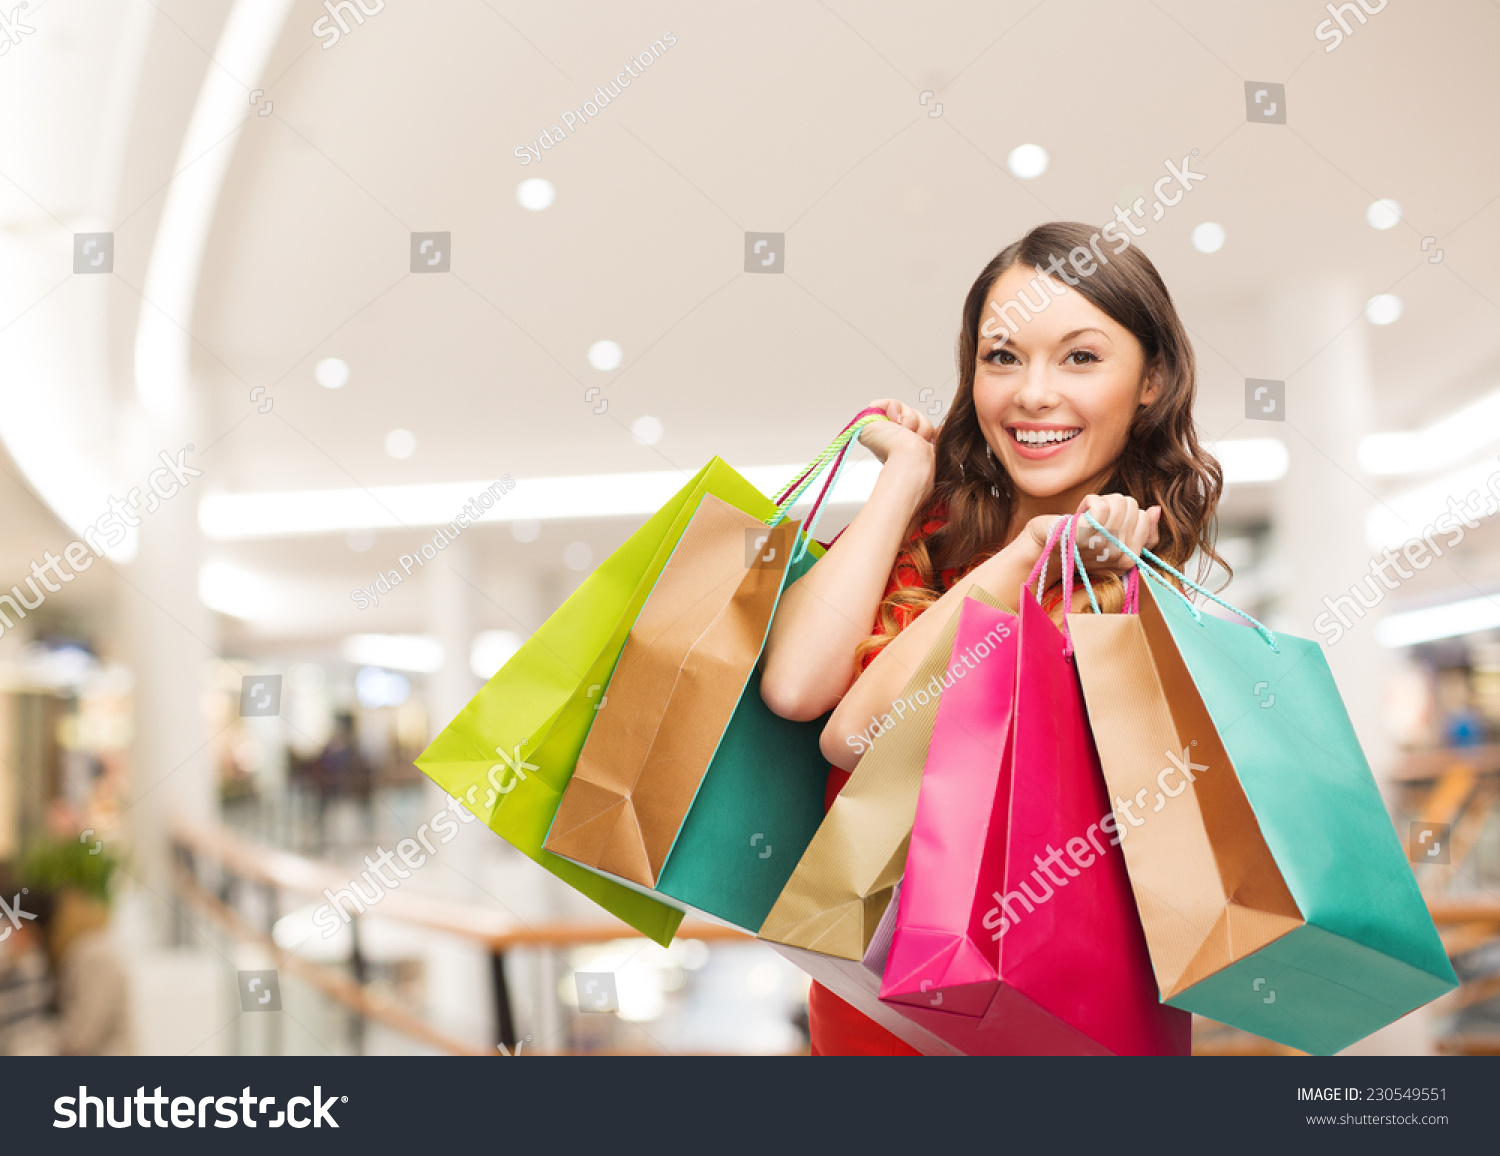 Customer with shopping bag Images, Stock Photos & Vectors | Shutterstock